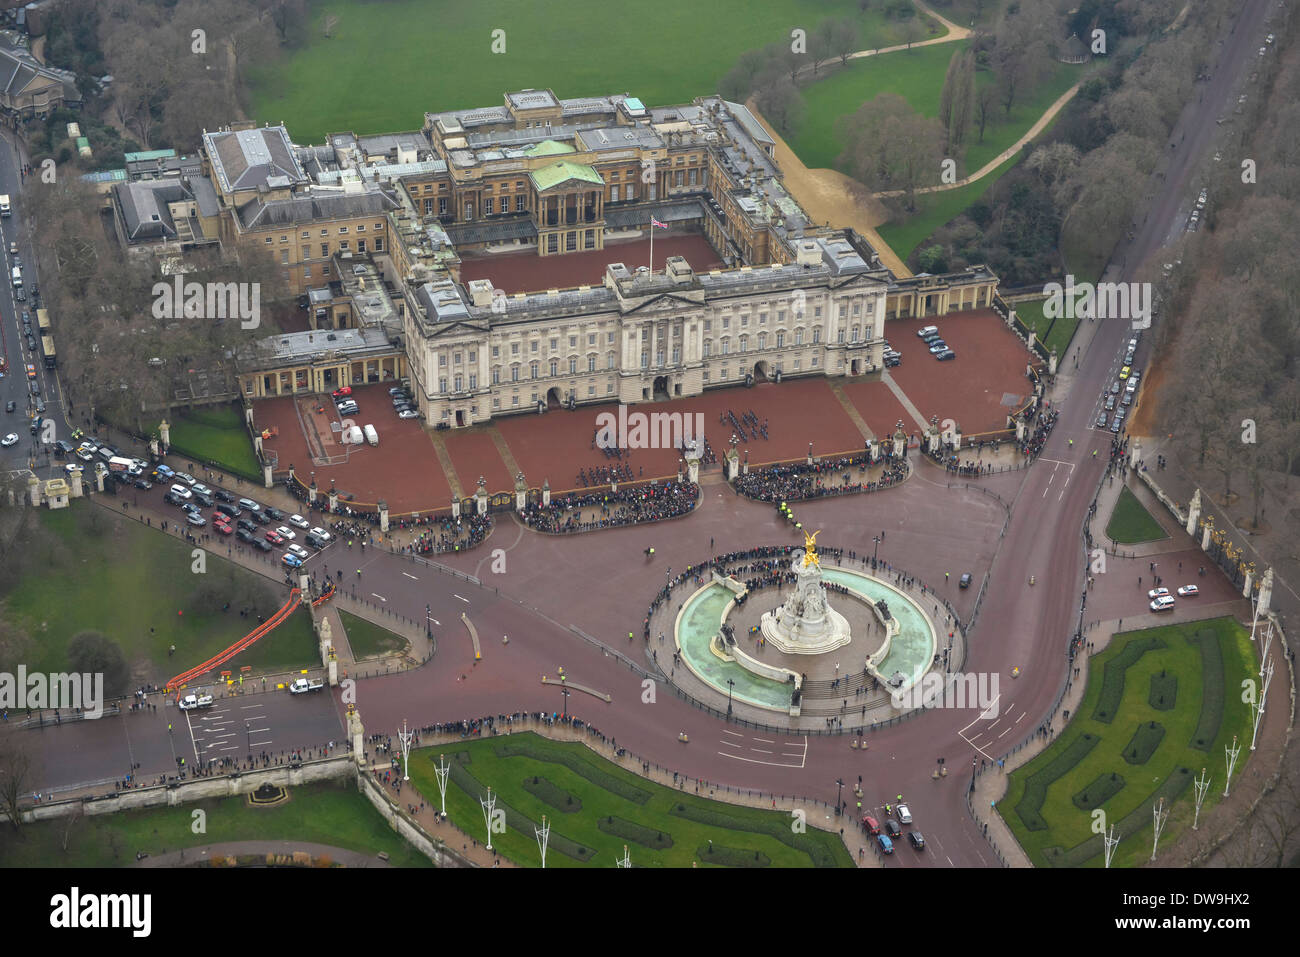 Aerial Photograph showing crowds in front of the Buckingham Palace, London, United Kingdom Stock Photo